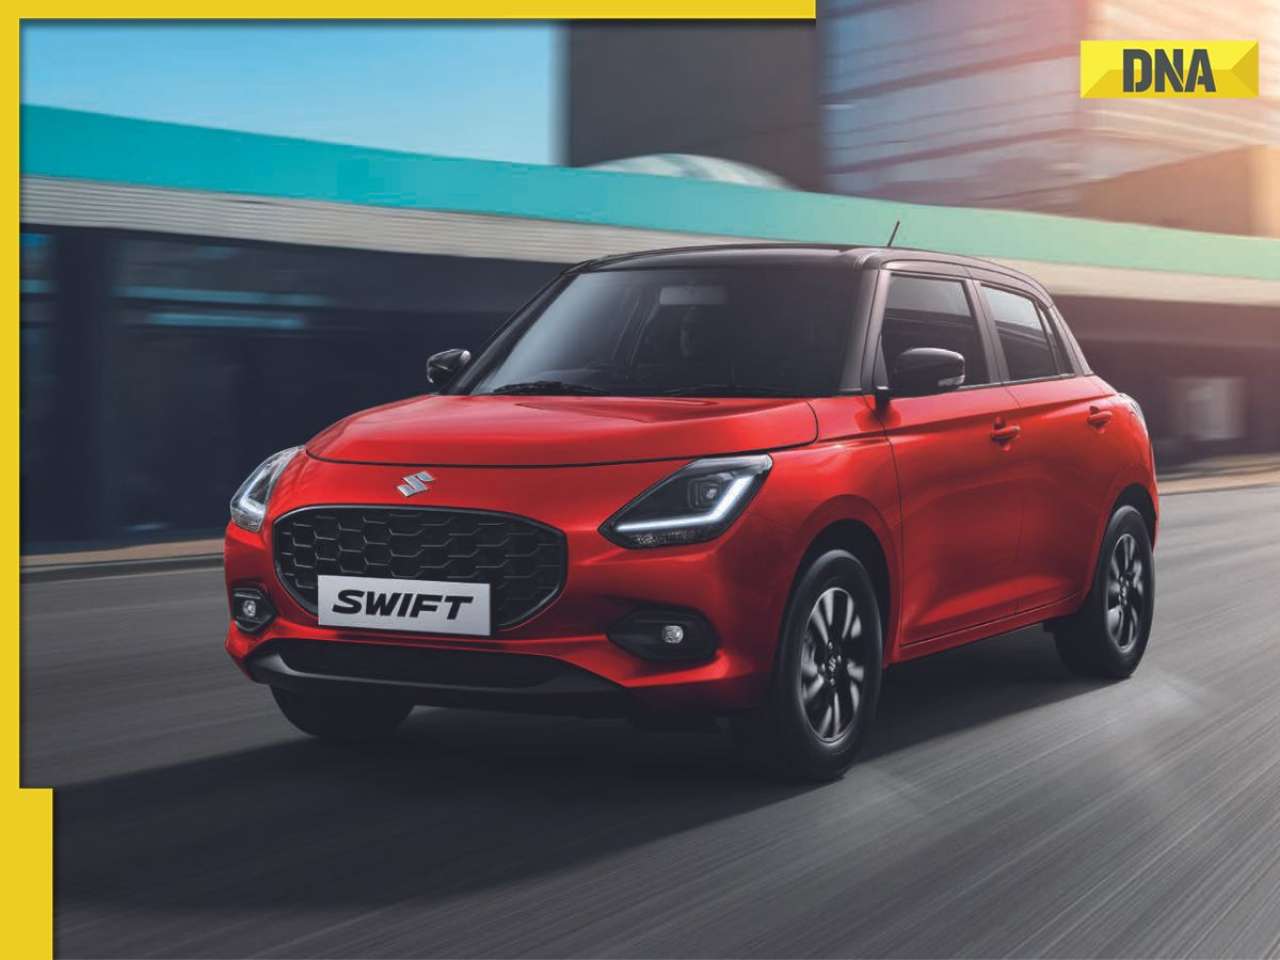 New Maruti Suzuki Swift launched in India, price starts at Rs 6.49 lakh